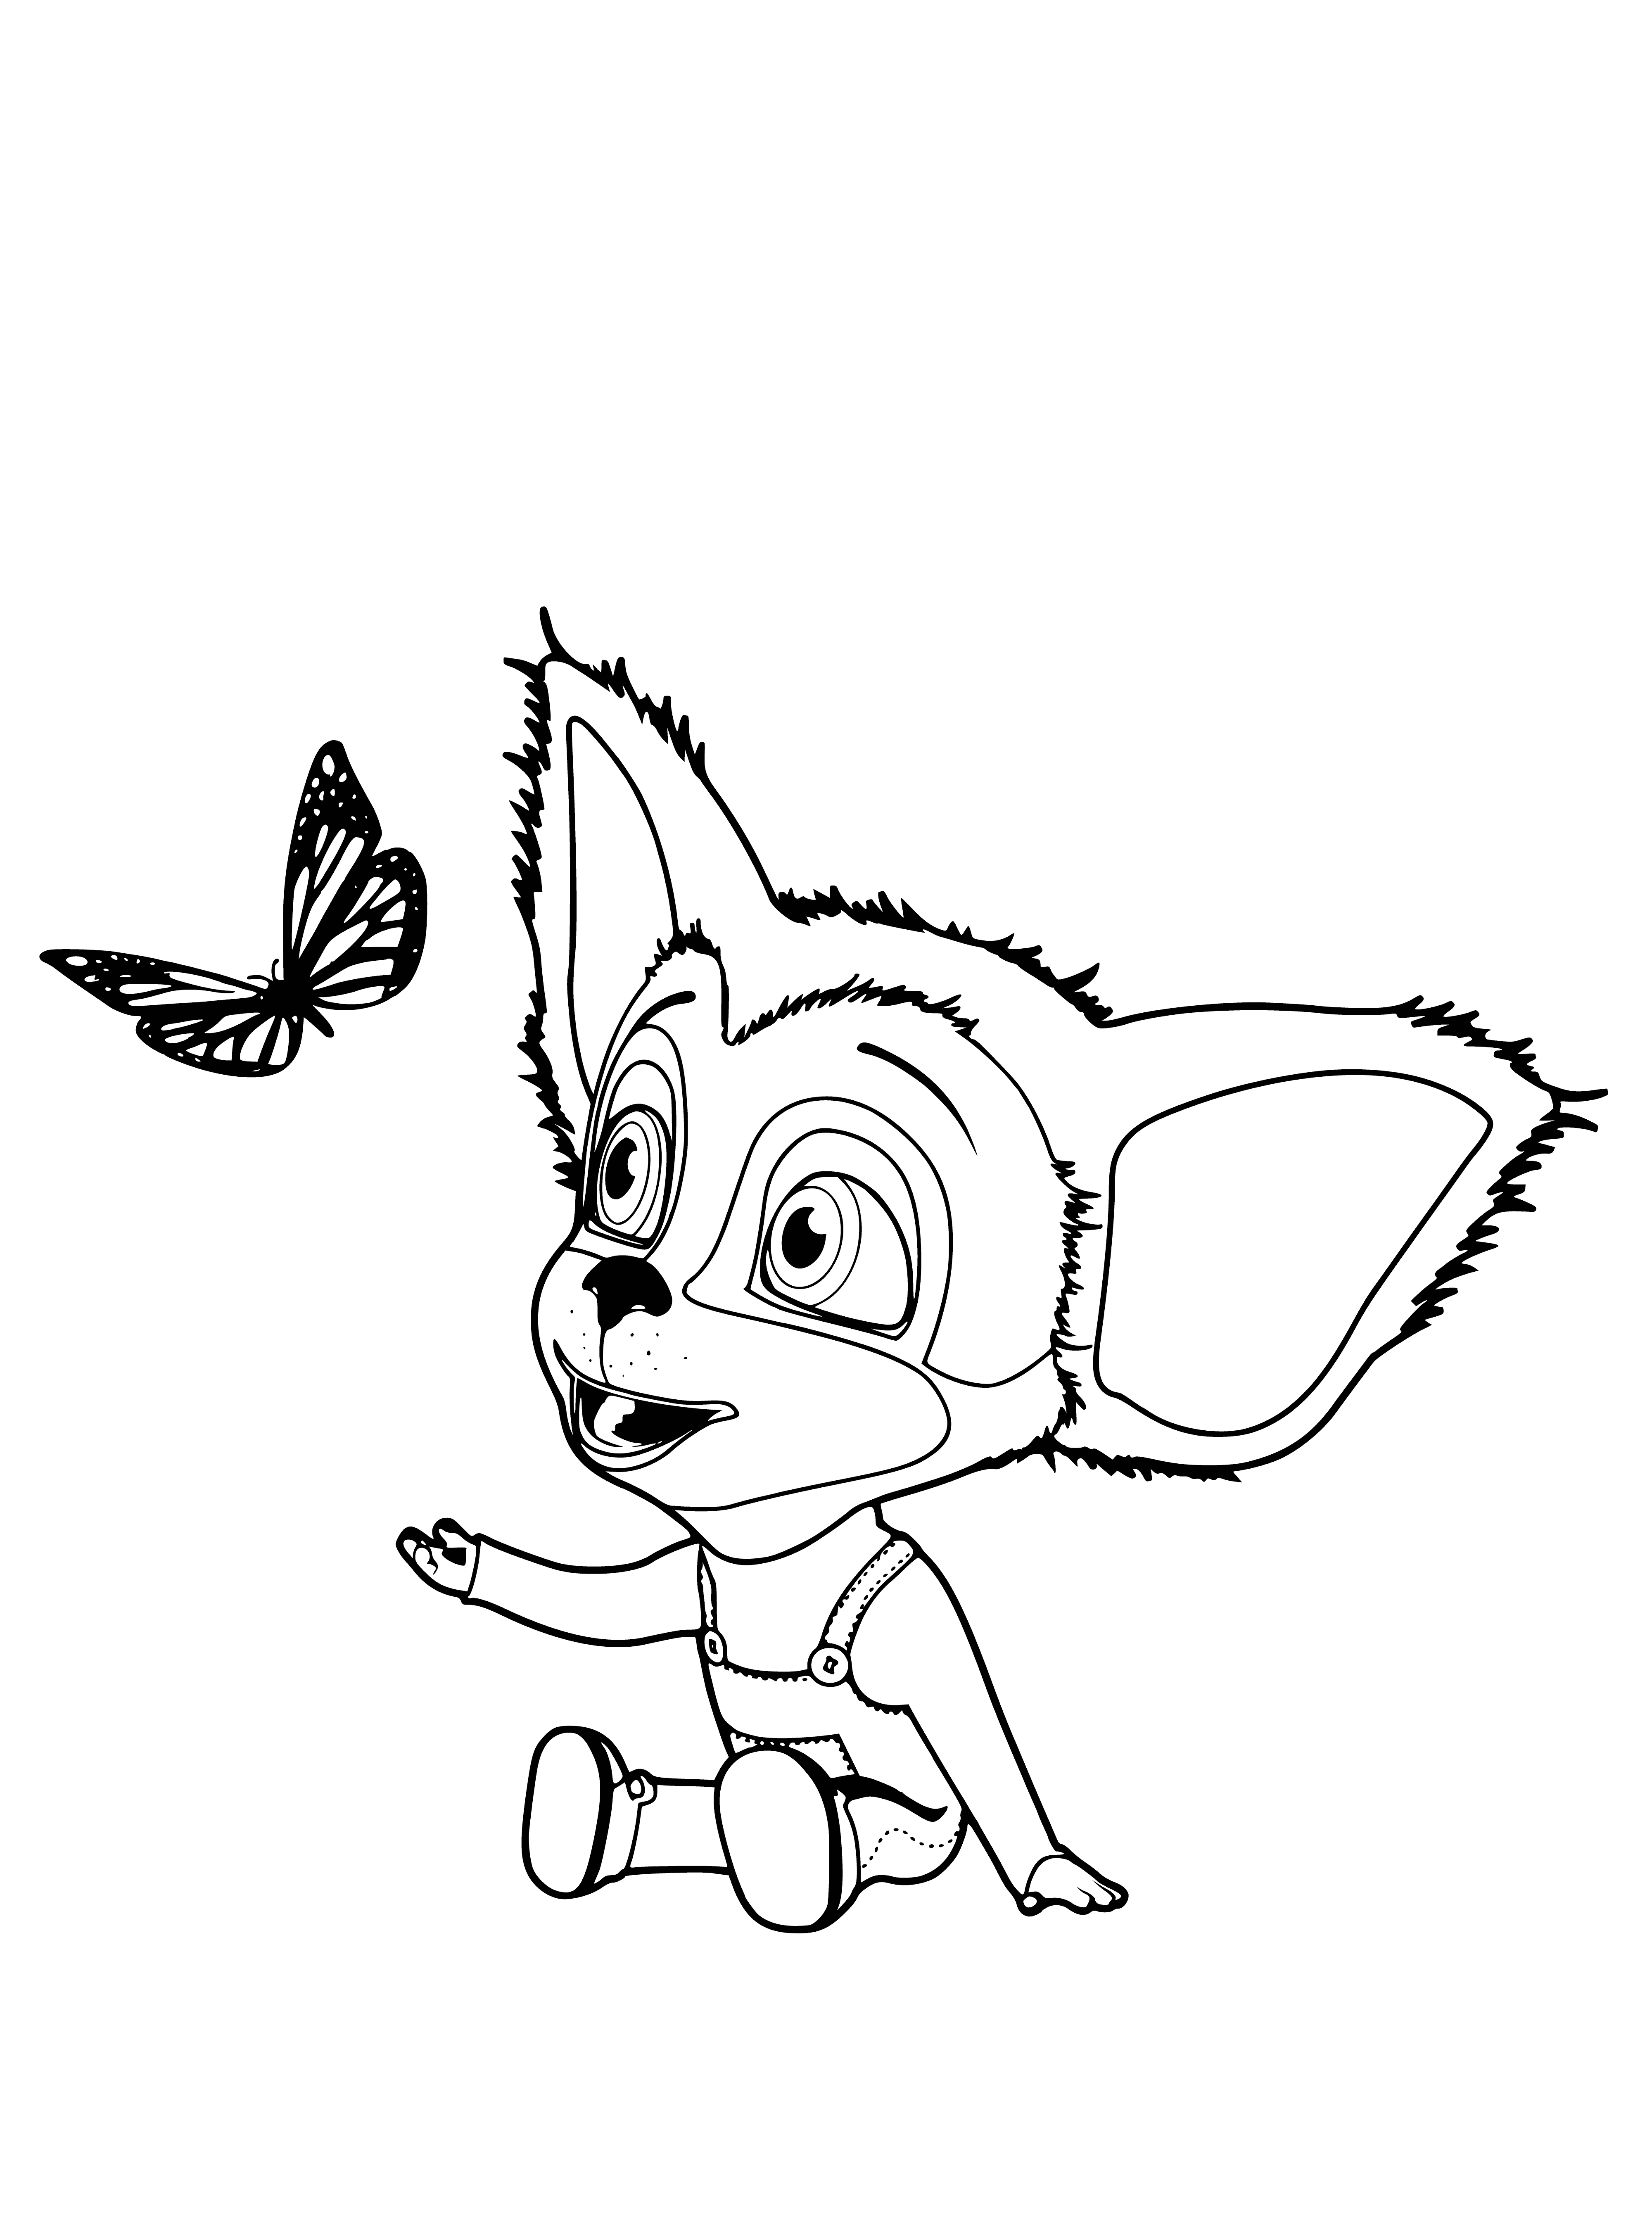 Kid and butterfly coloring page